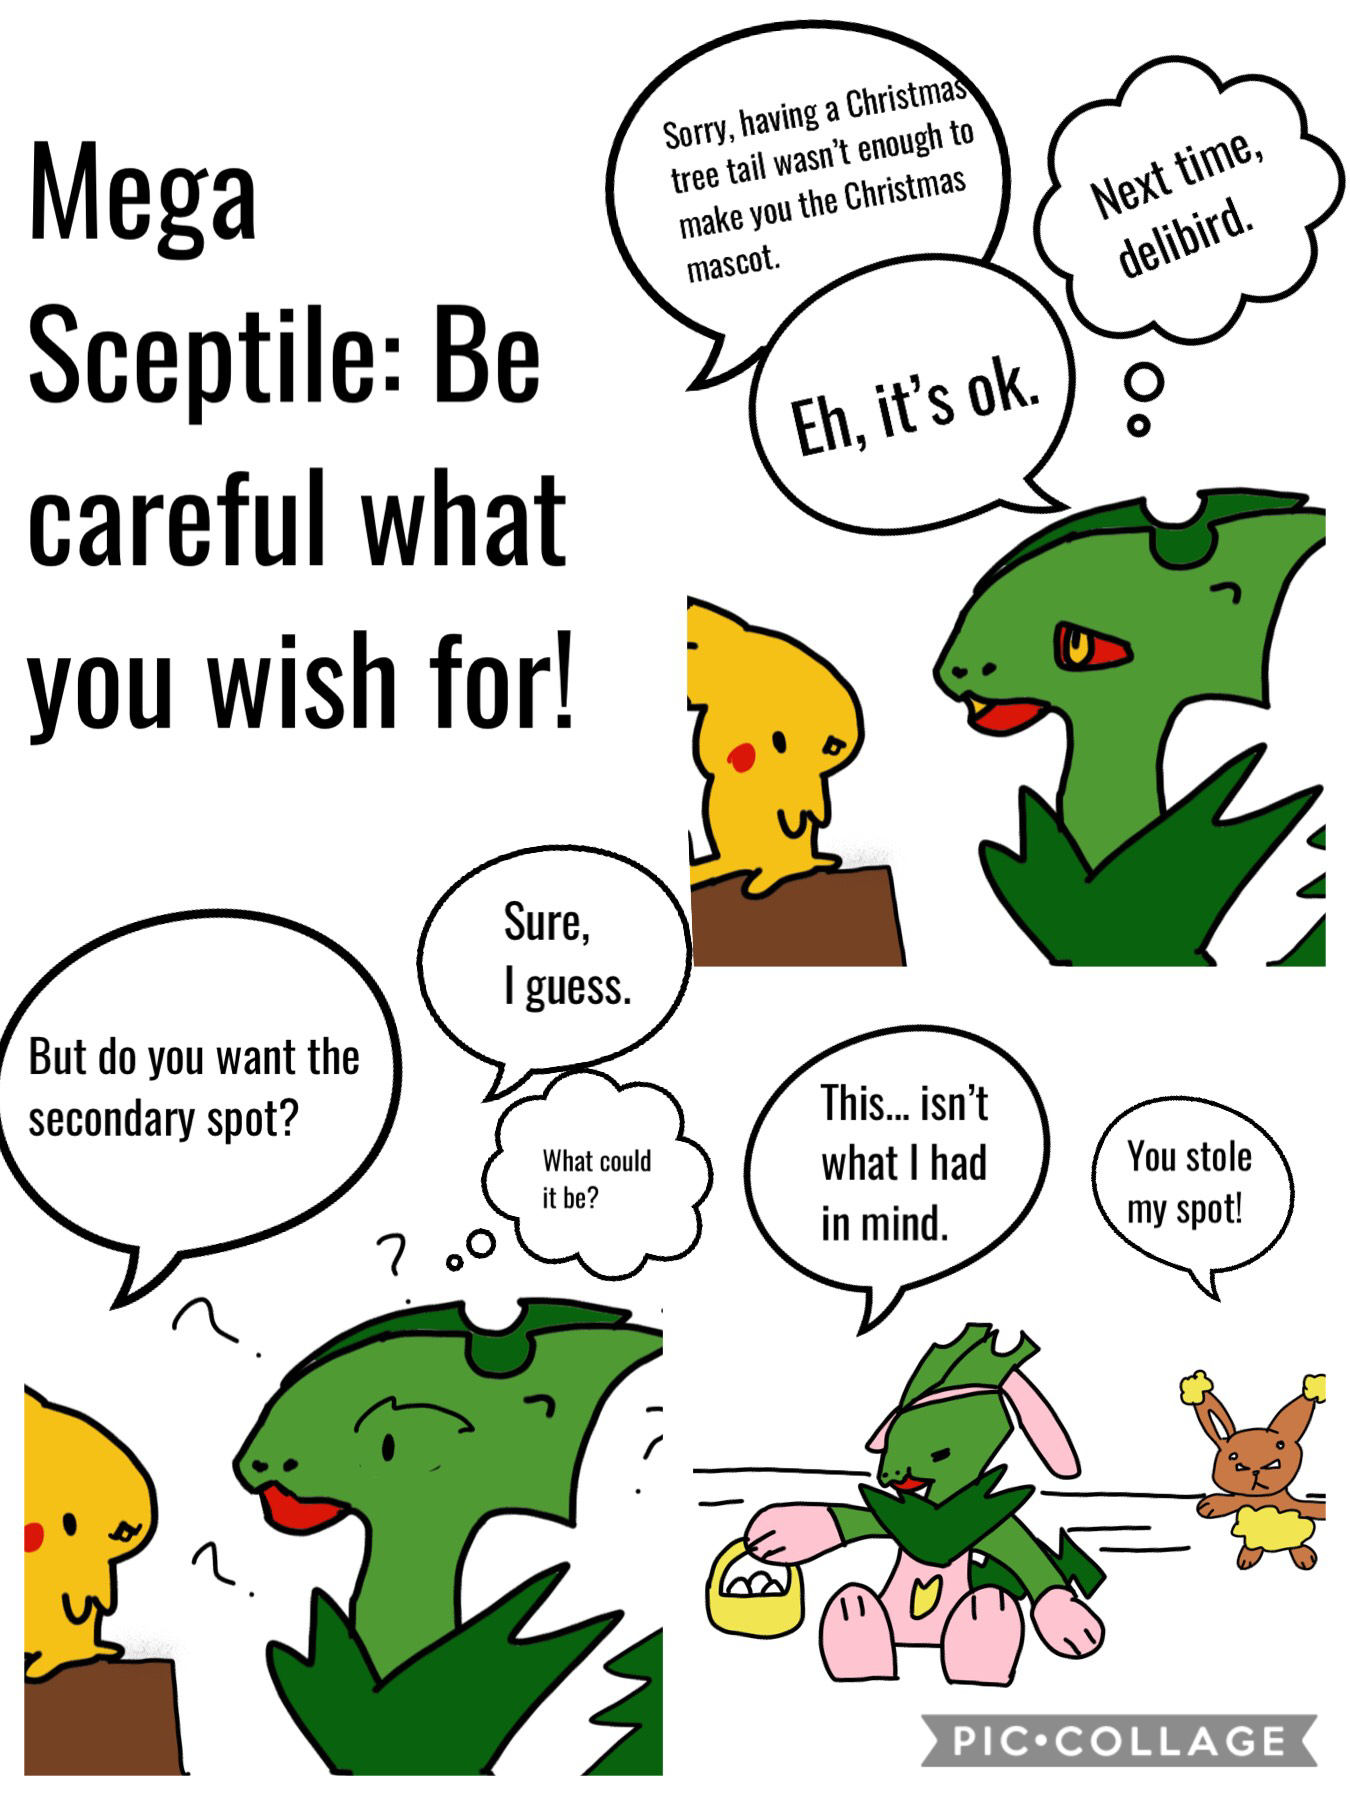 Mega Sceptile: Be careful what you wish for!